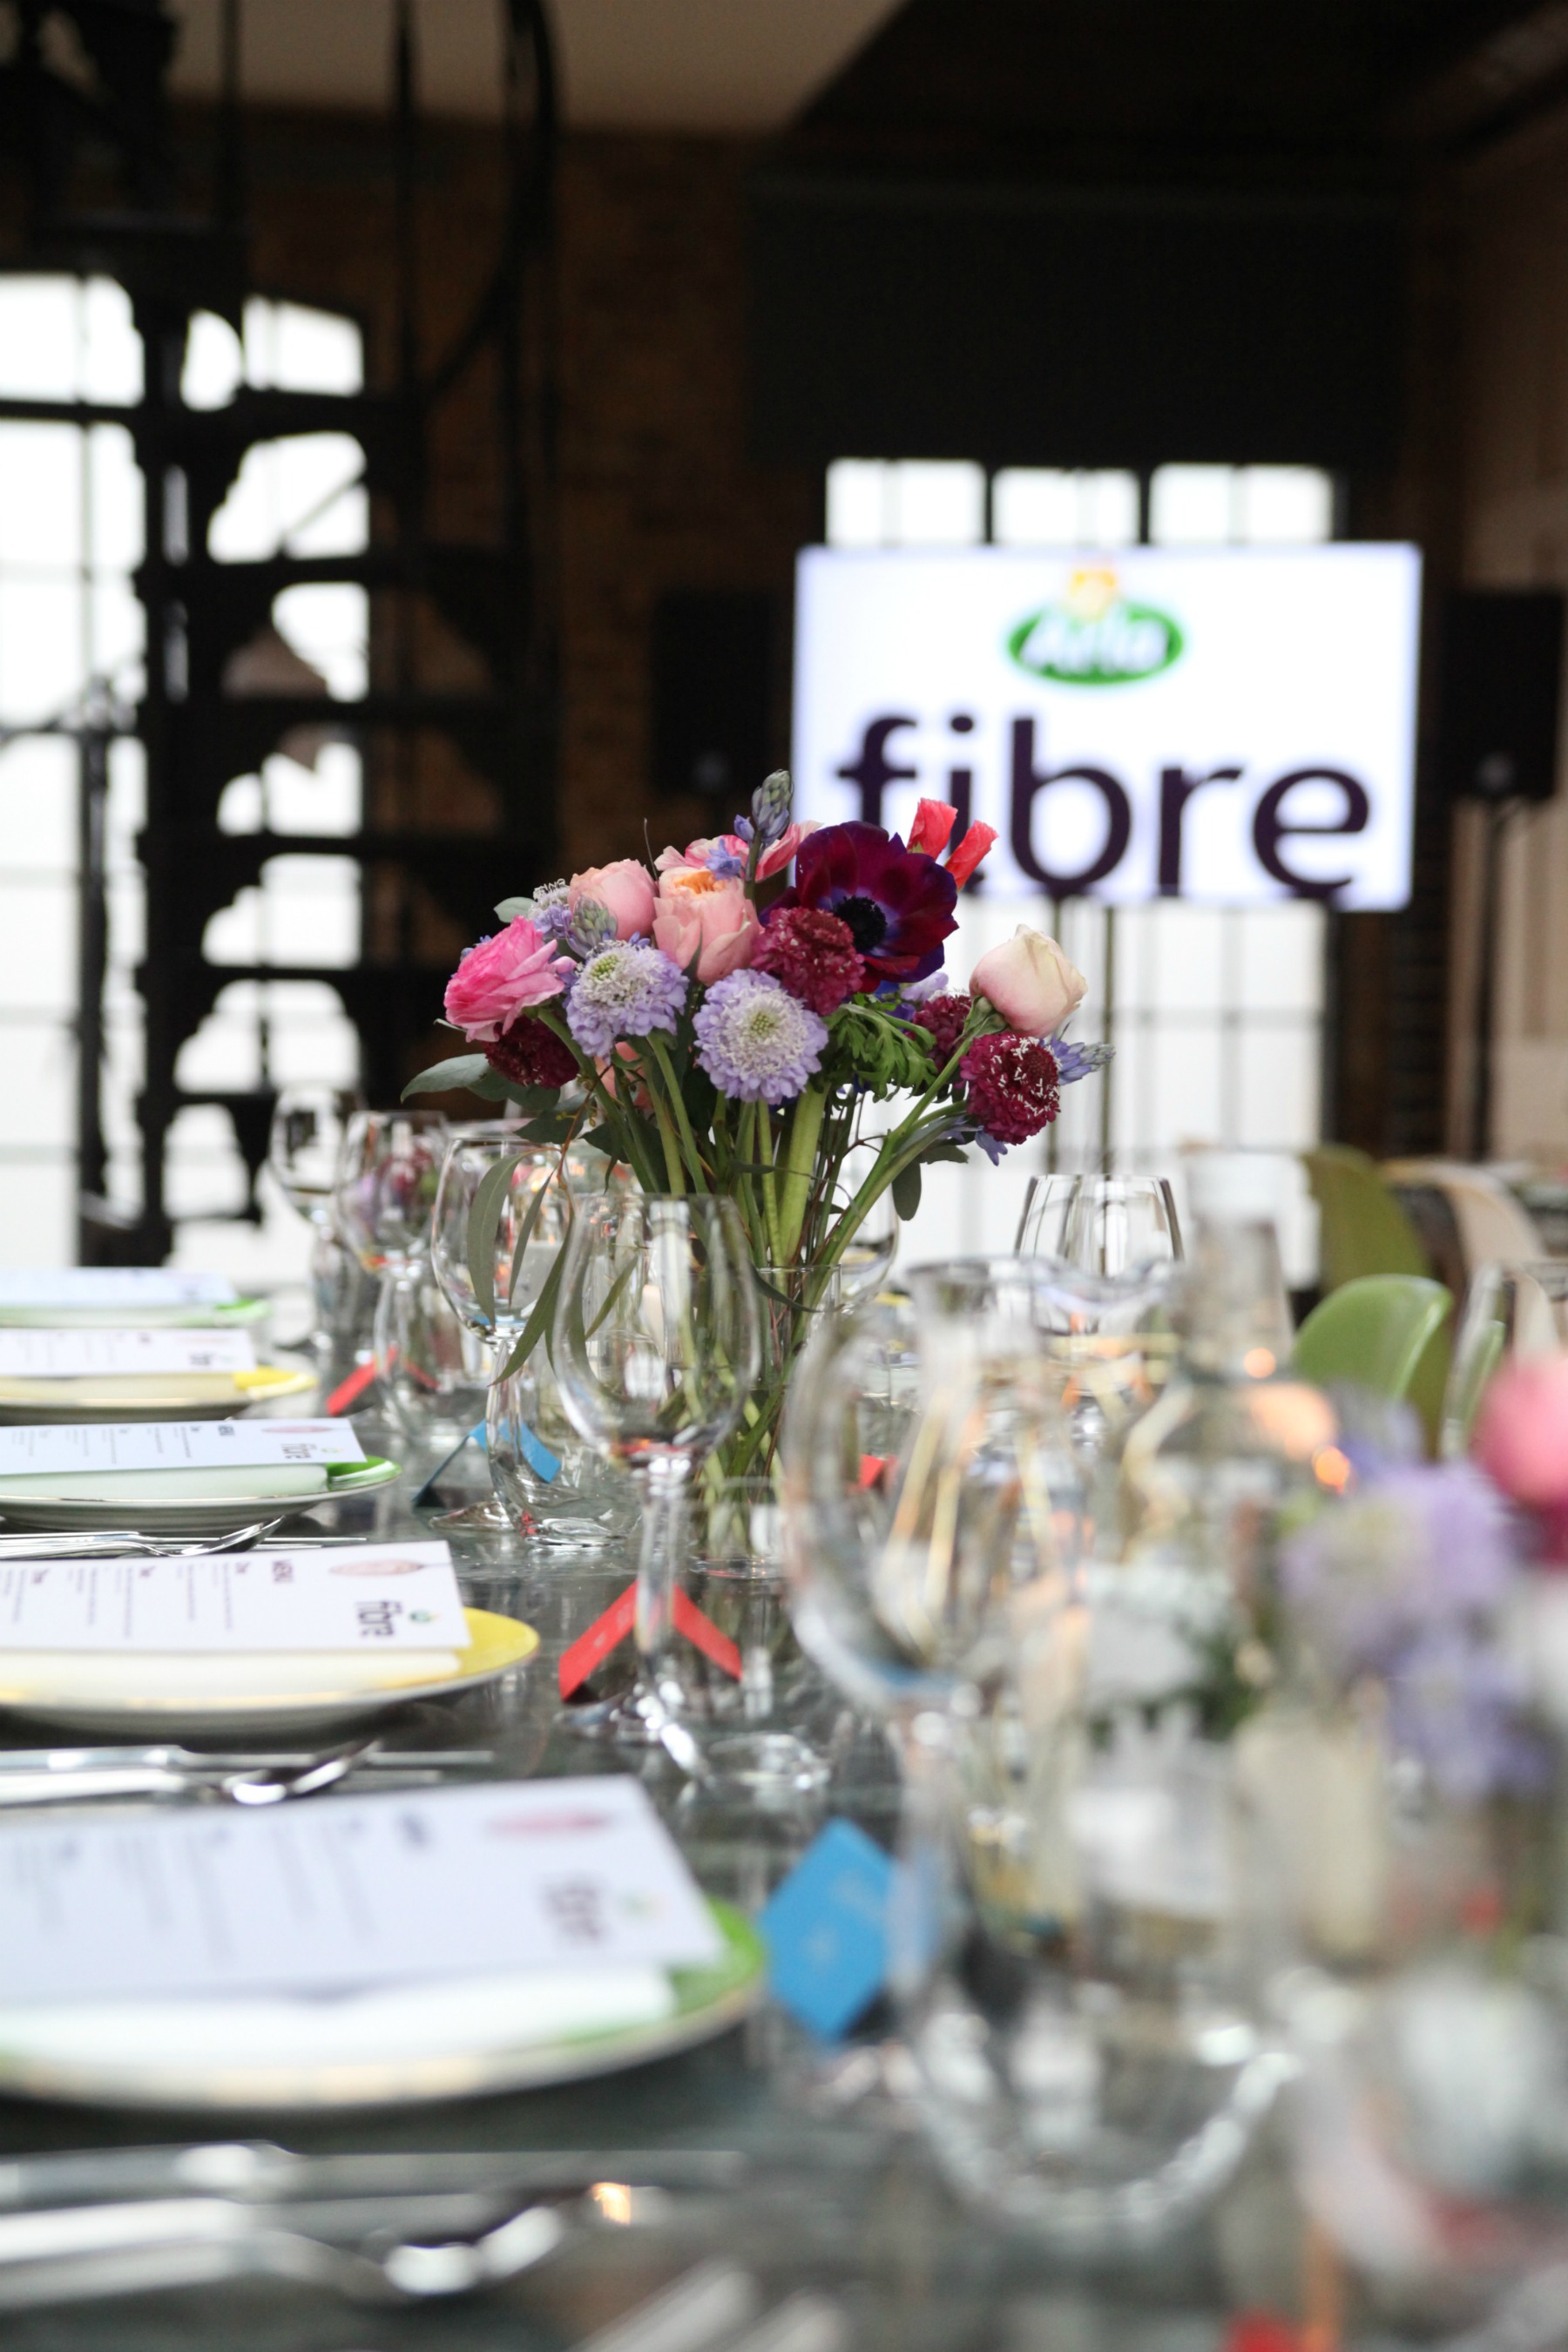 Gorgeous flowers at the Arla Fibre launch lunch